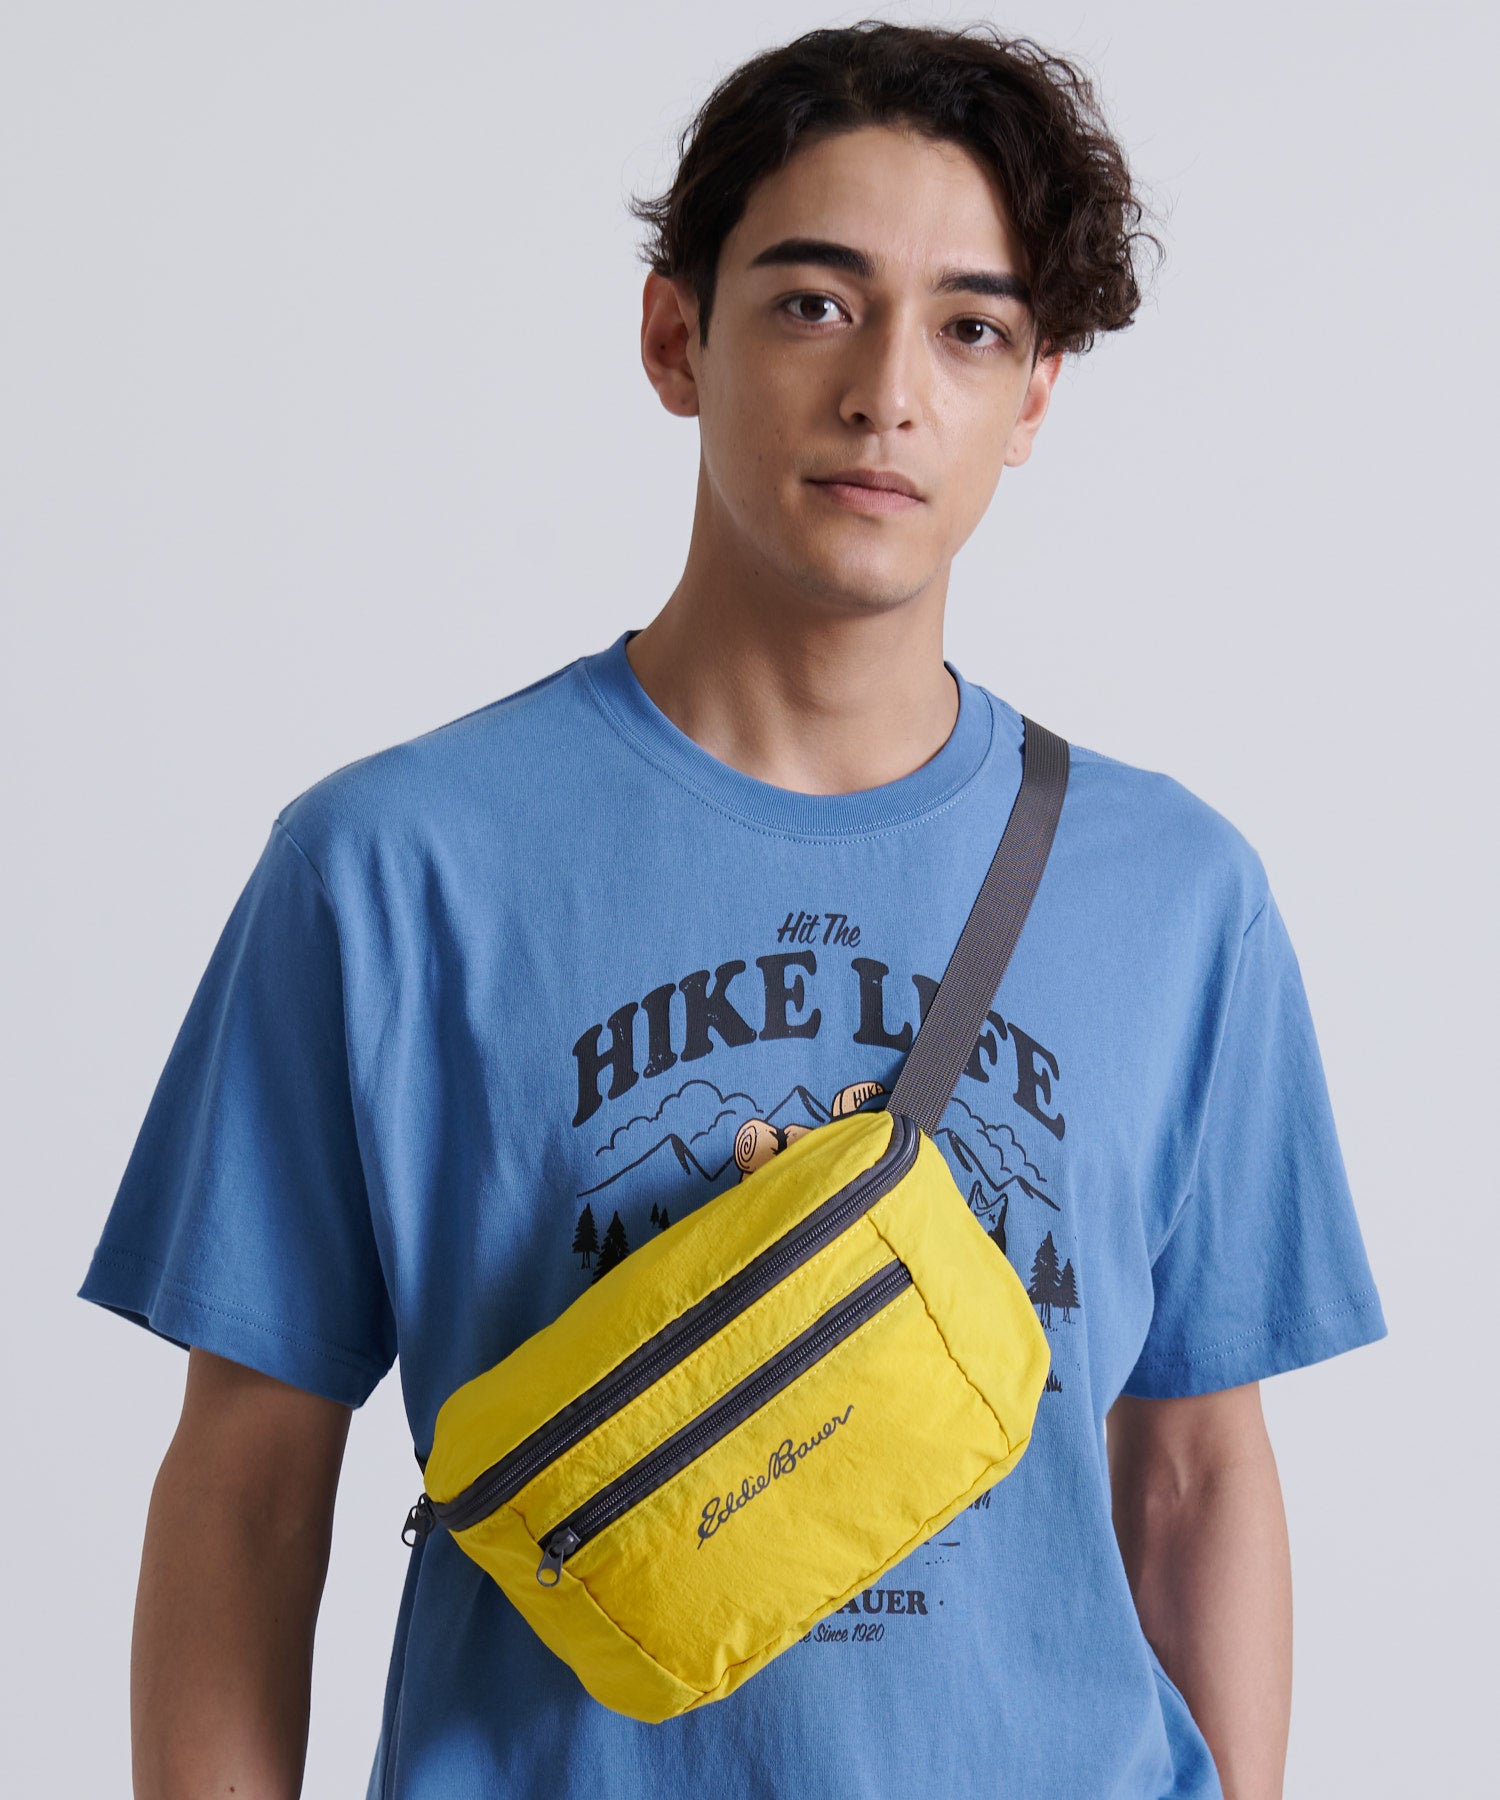 【TIME SALE】パッカブル ウエスト パック/STOWAWAY PACKABLE WAIST PACK